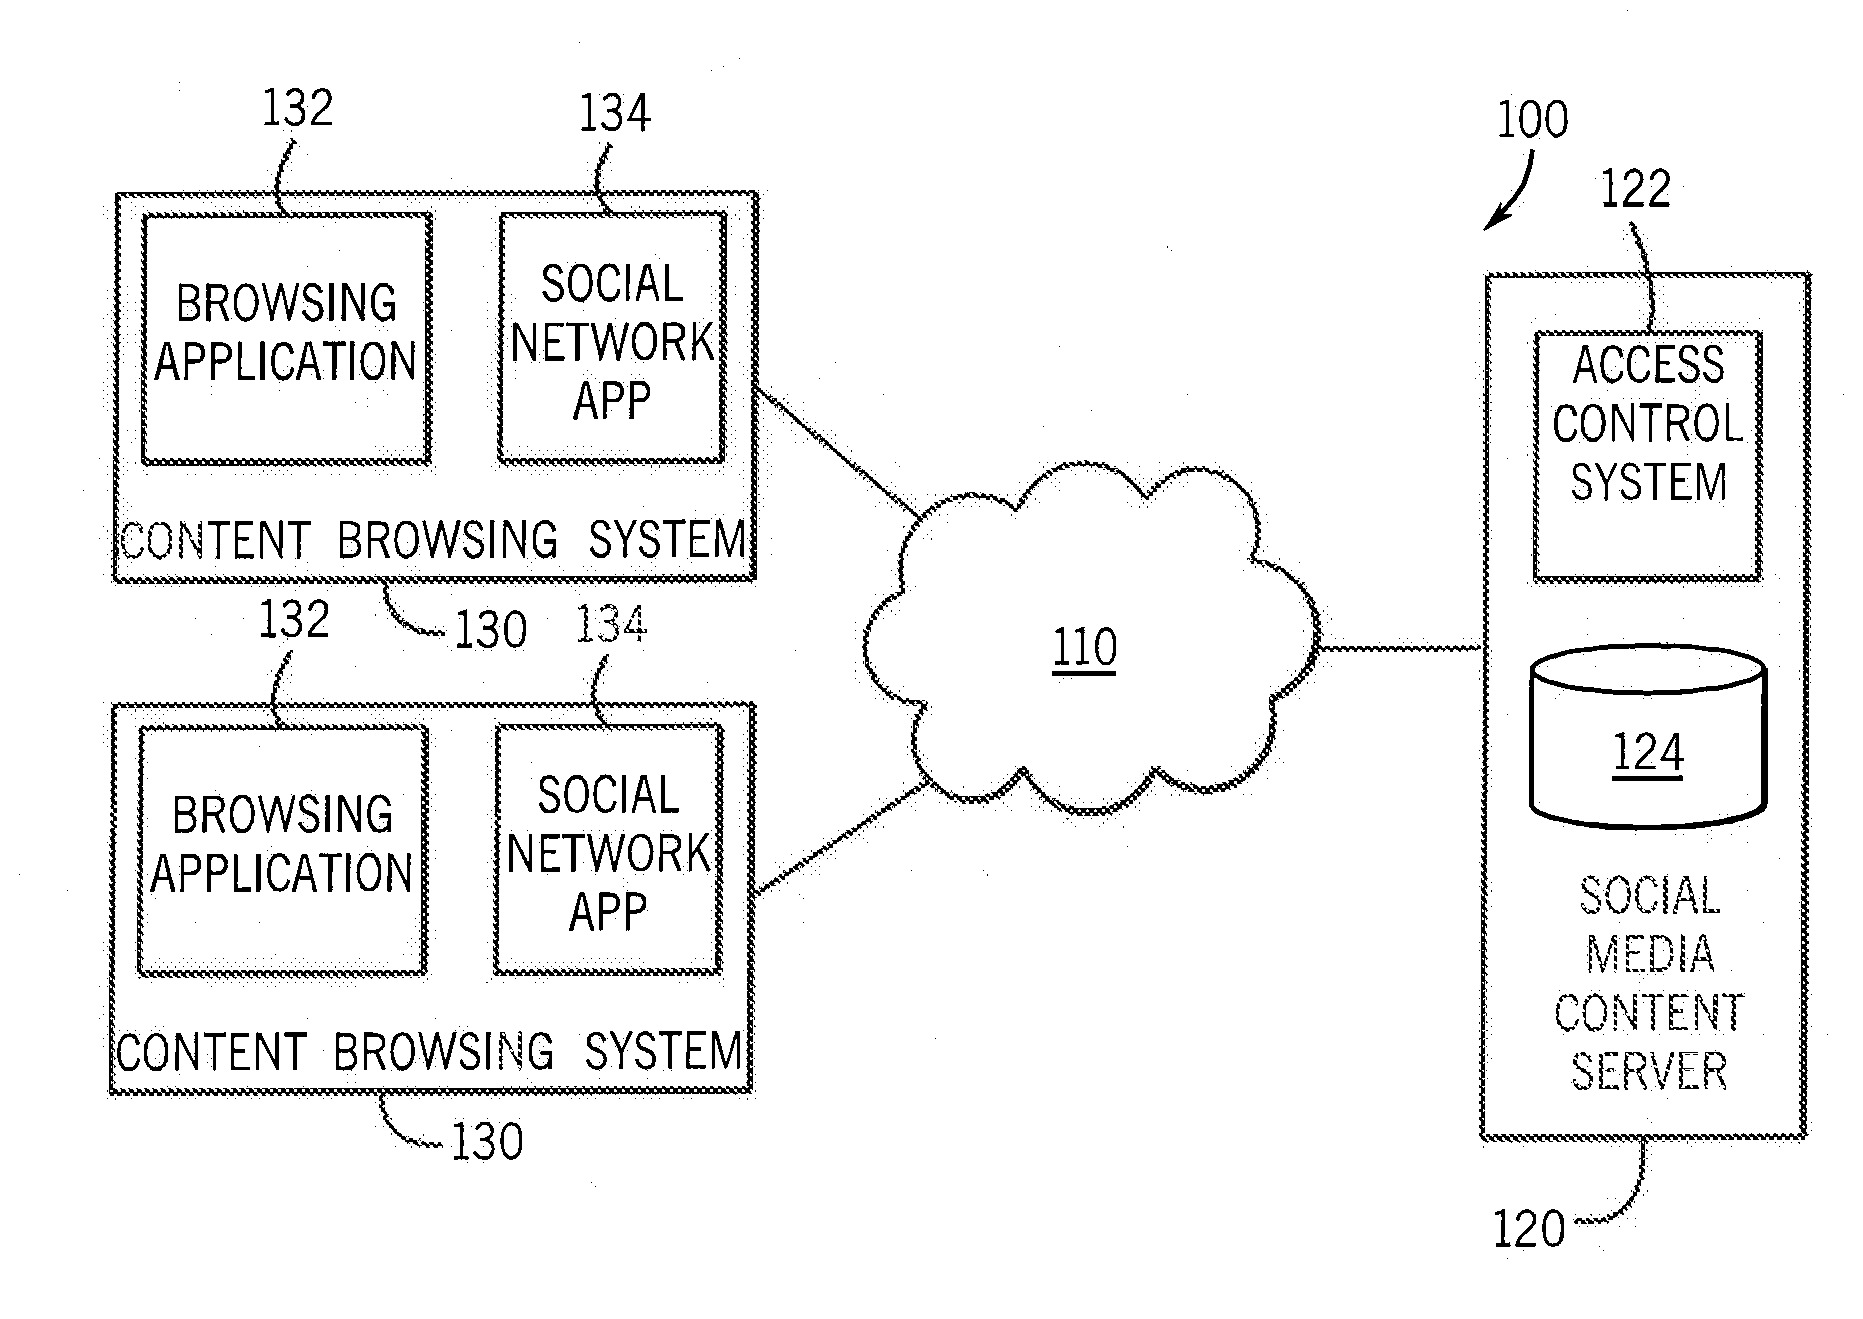 Network-Oriented Matrix Sharing For Genealogy And Social Networks Through Network-Role-Based Access Controls